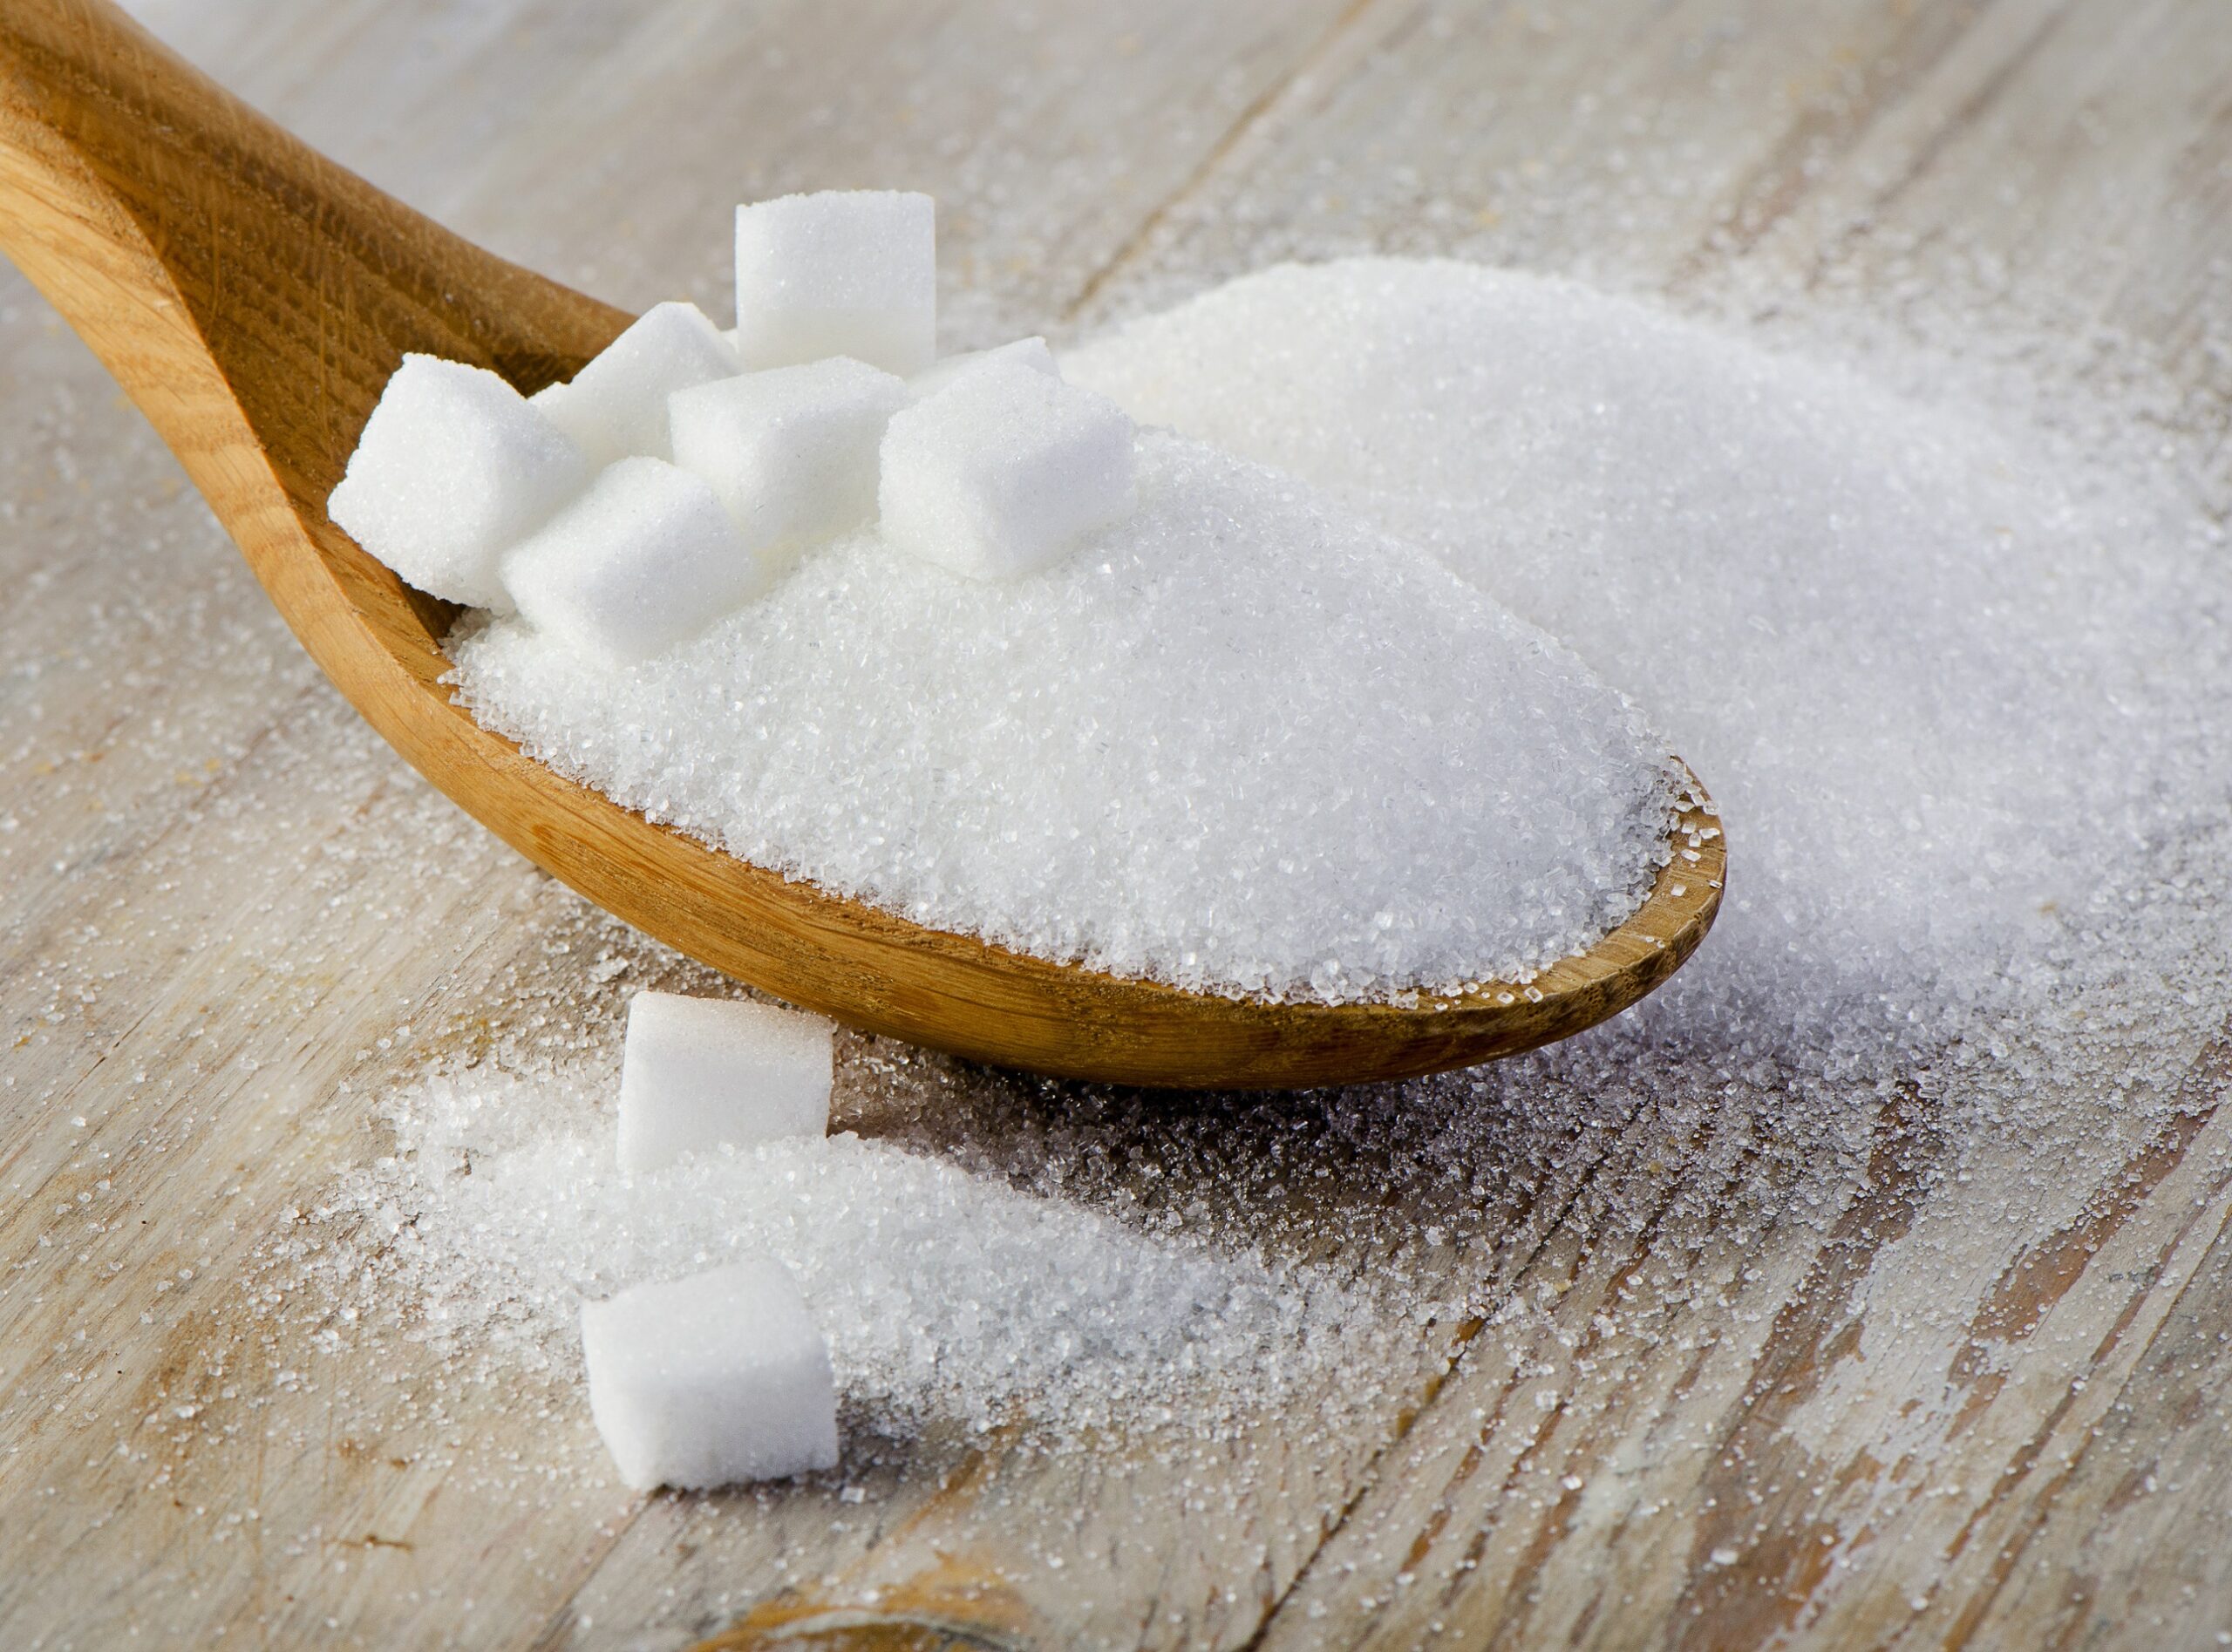 How to recognize added sugar in foods